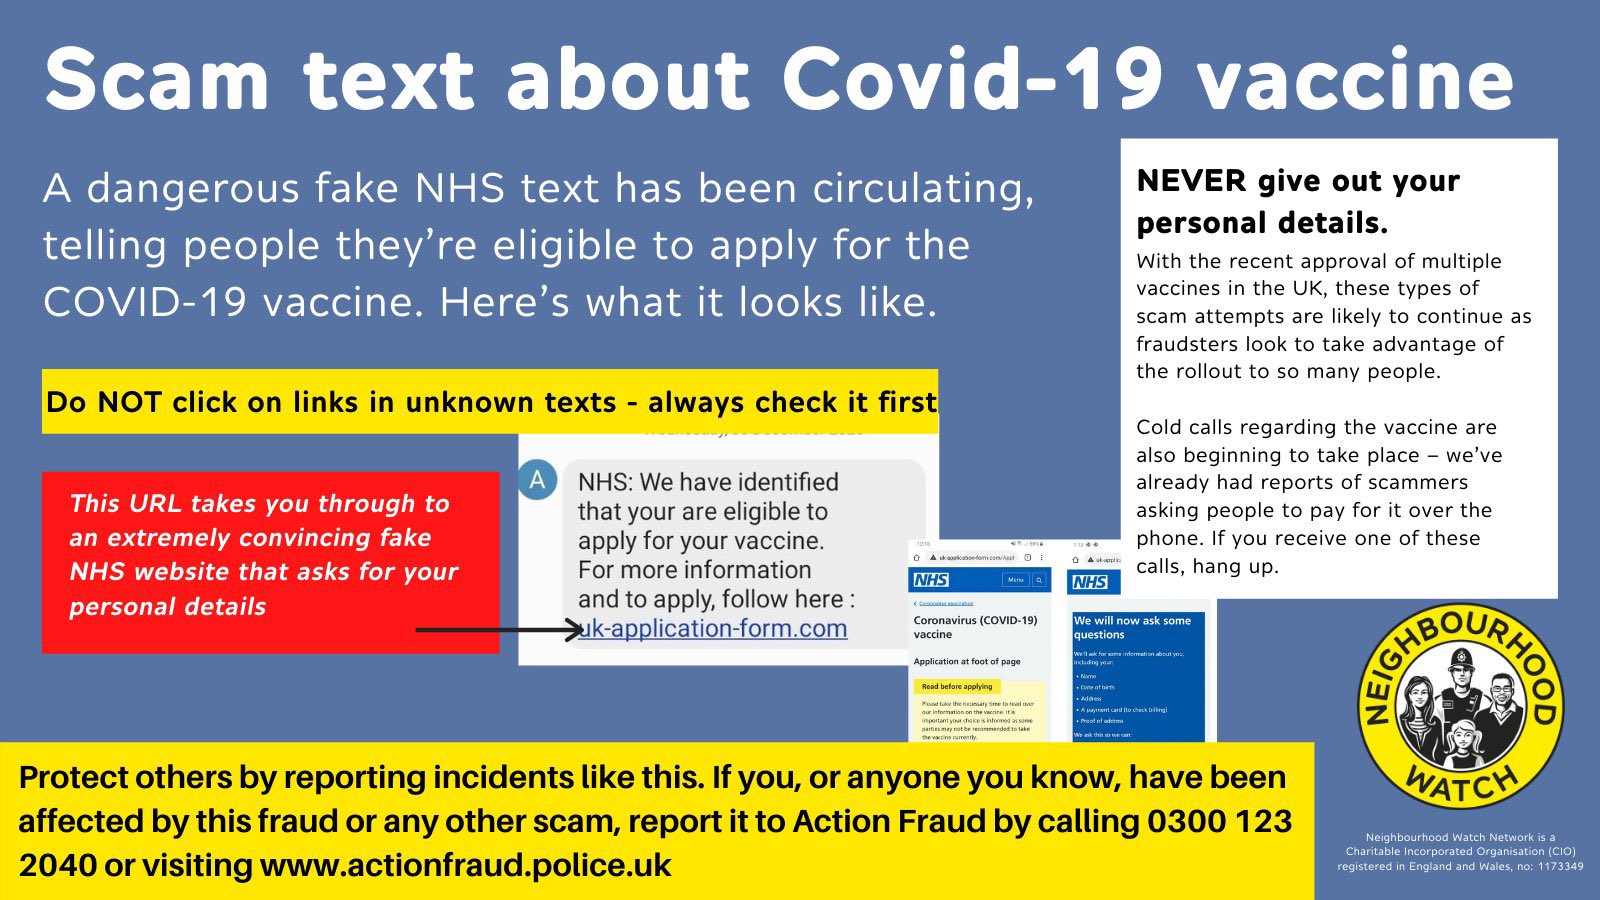 Information about the latest Covid-19 vaccine scap being sent by text message.